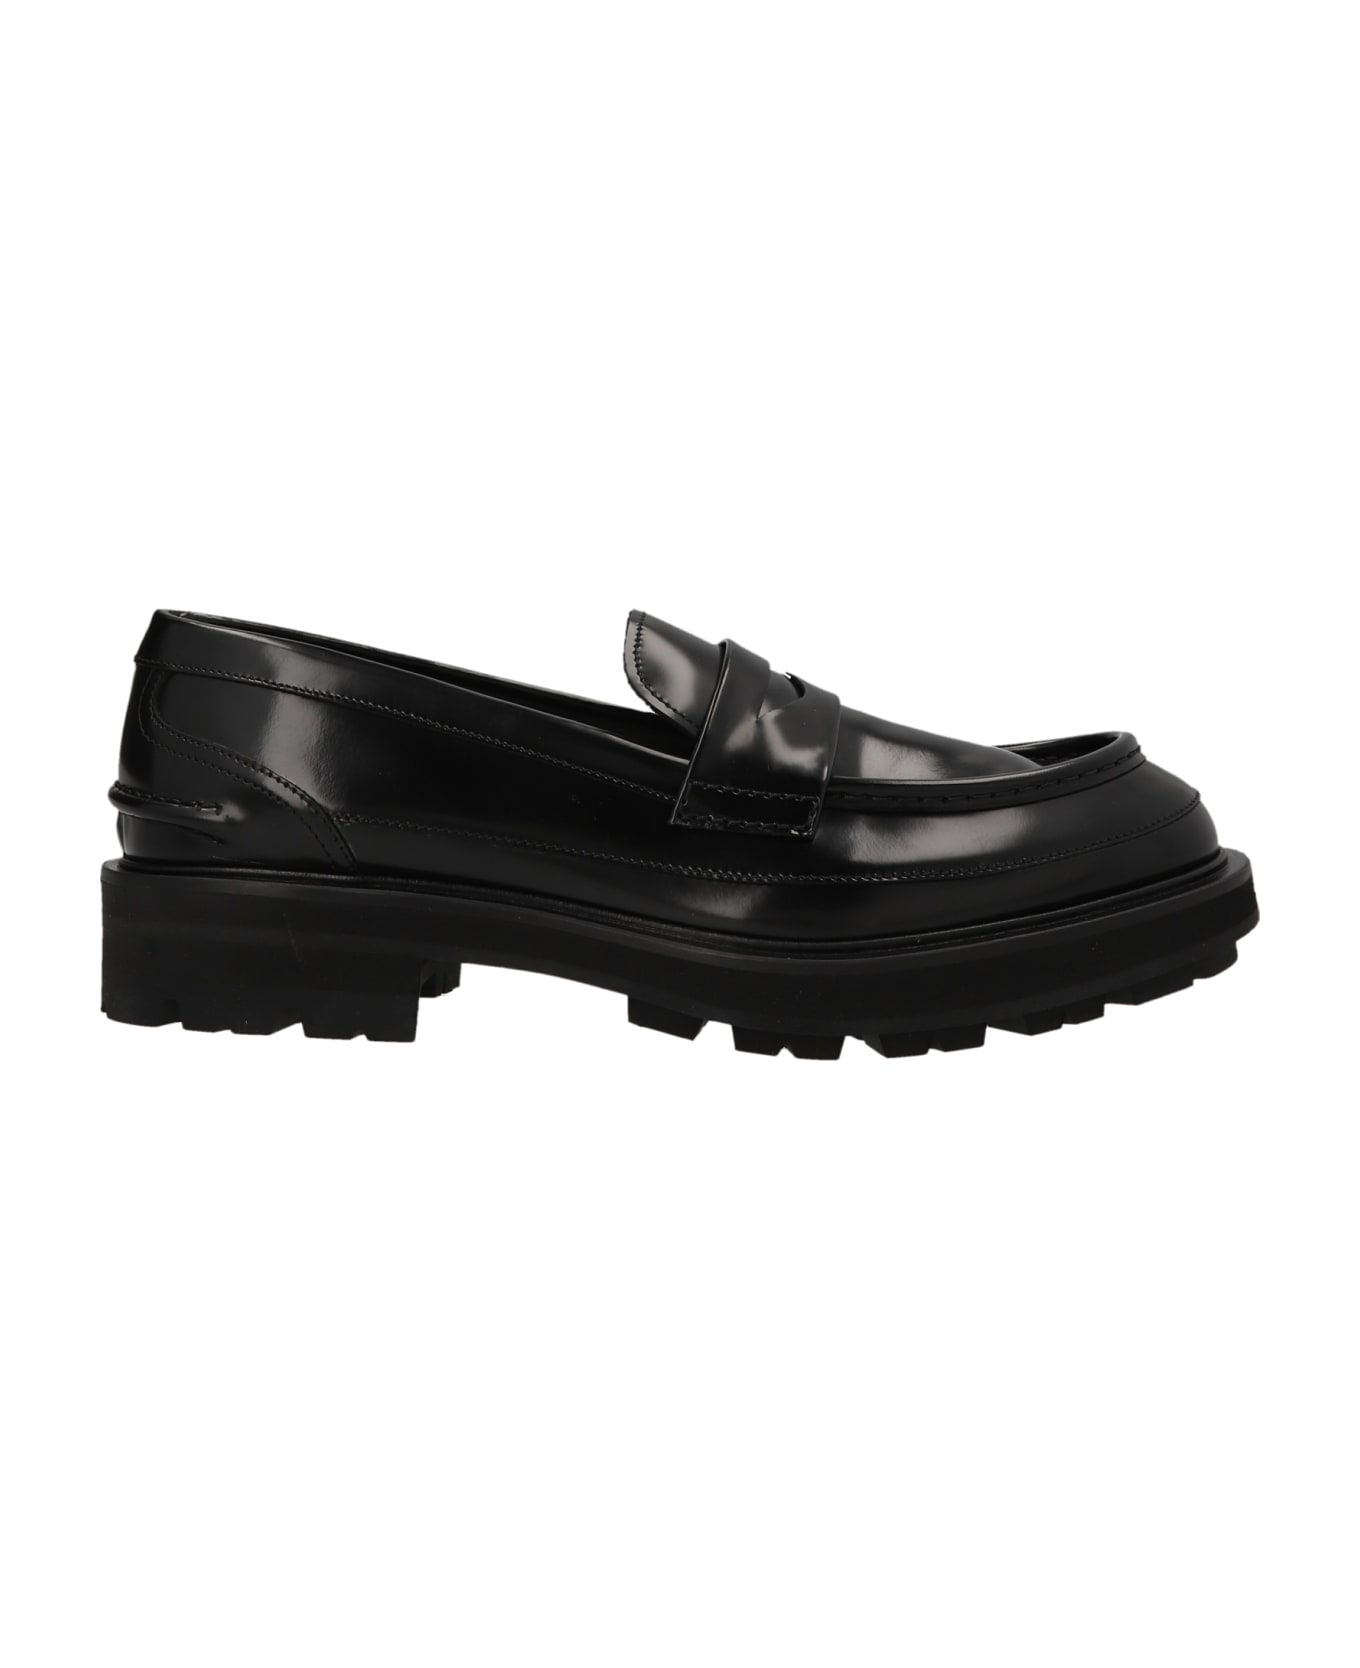 Alexander McQueen Leather Loafers - Black  